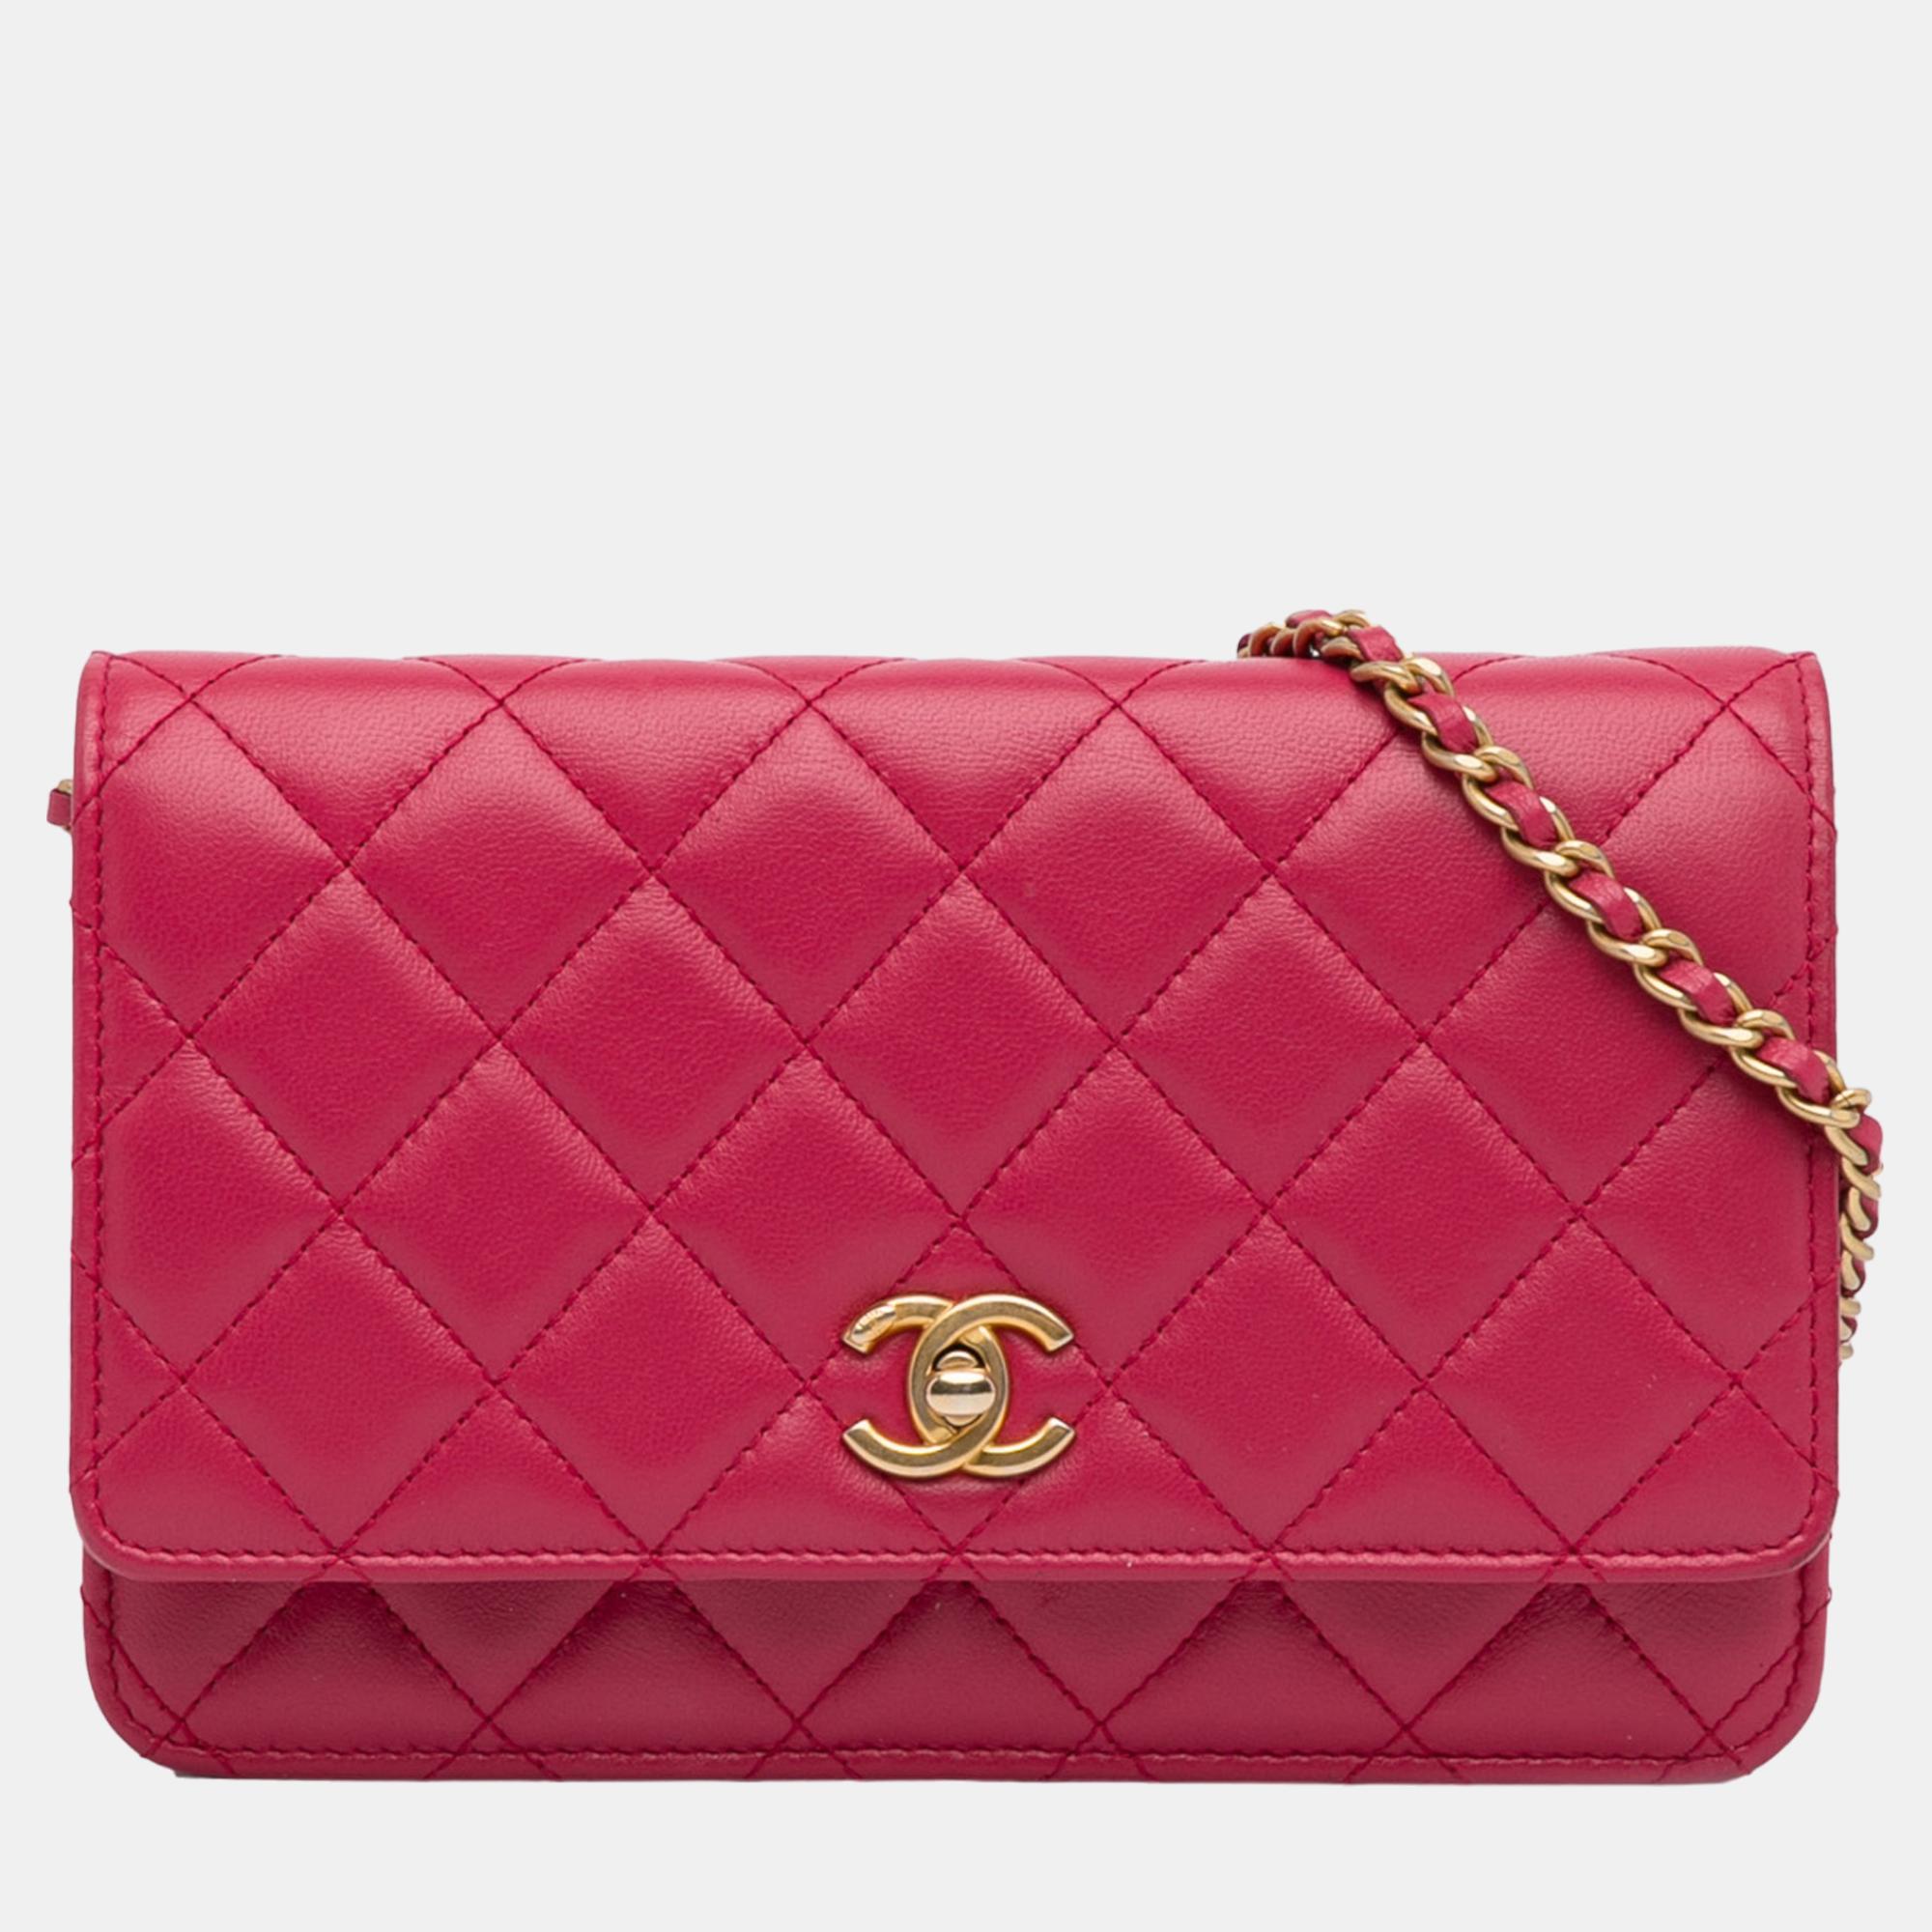 Chanel pink lambskin pearl crush wallet on chain